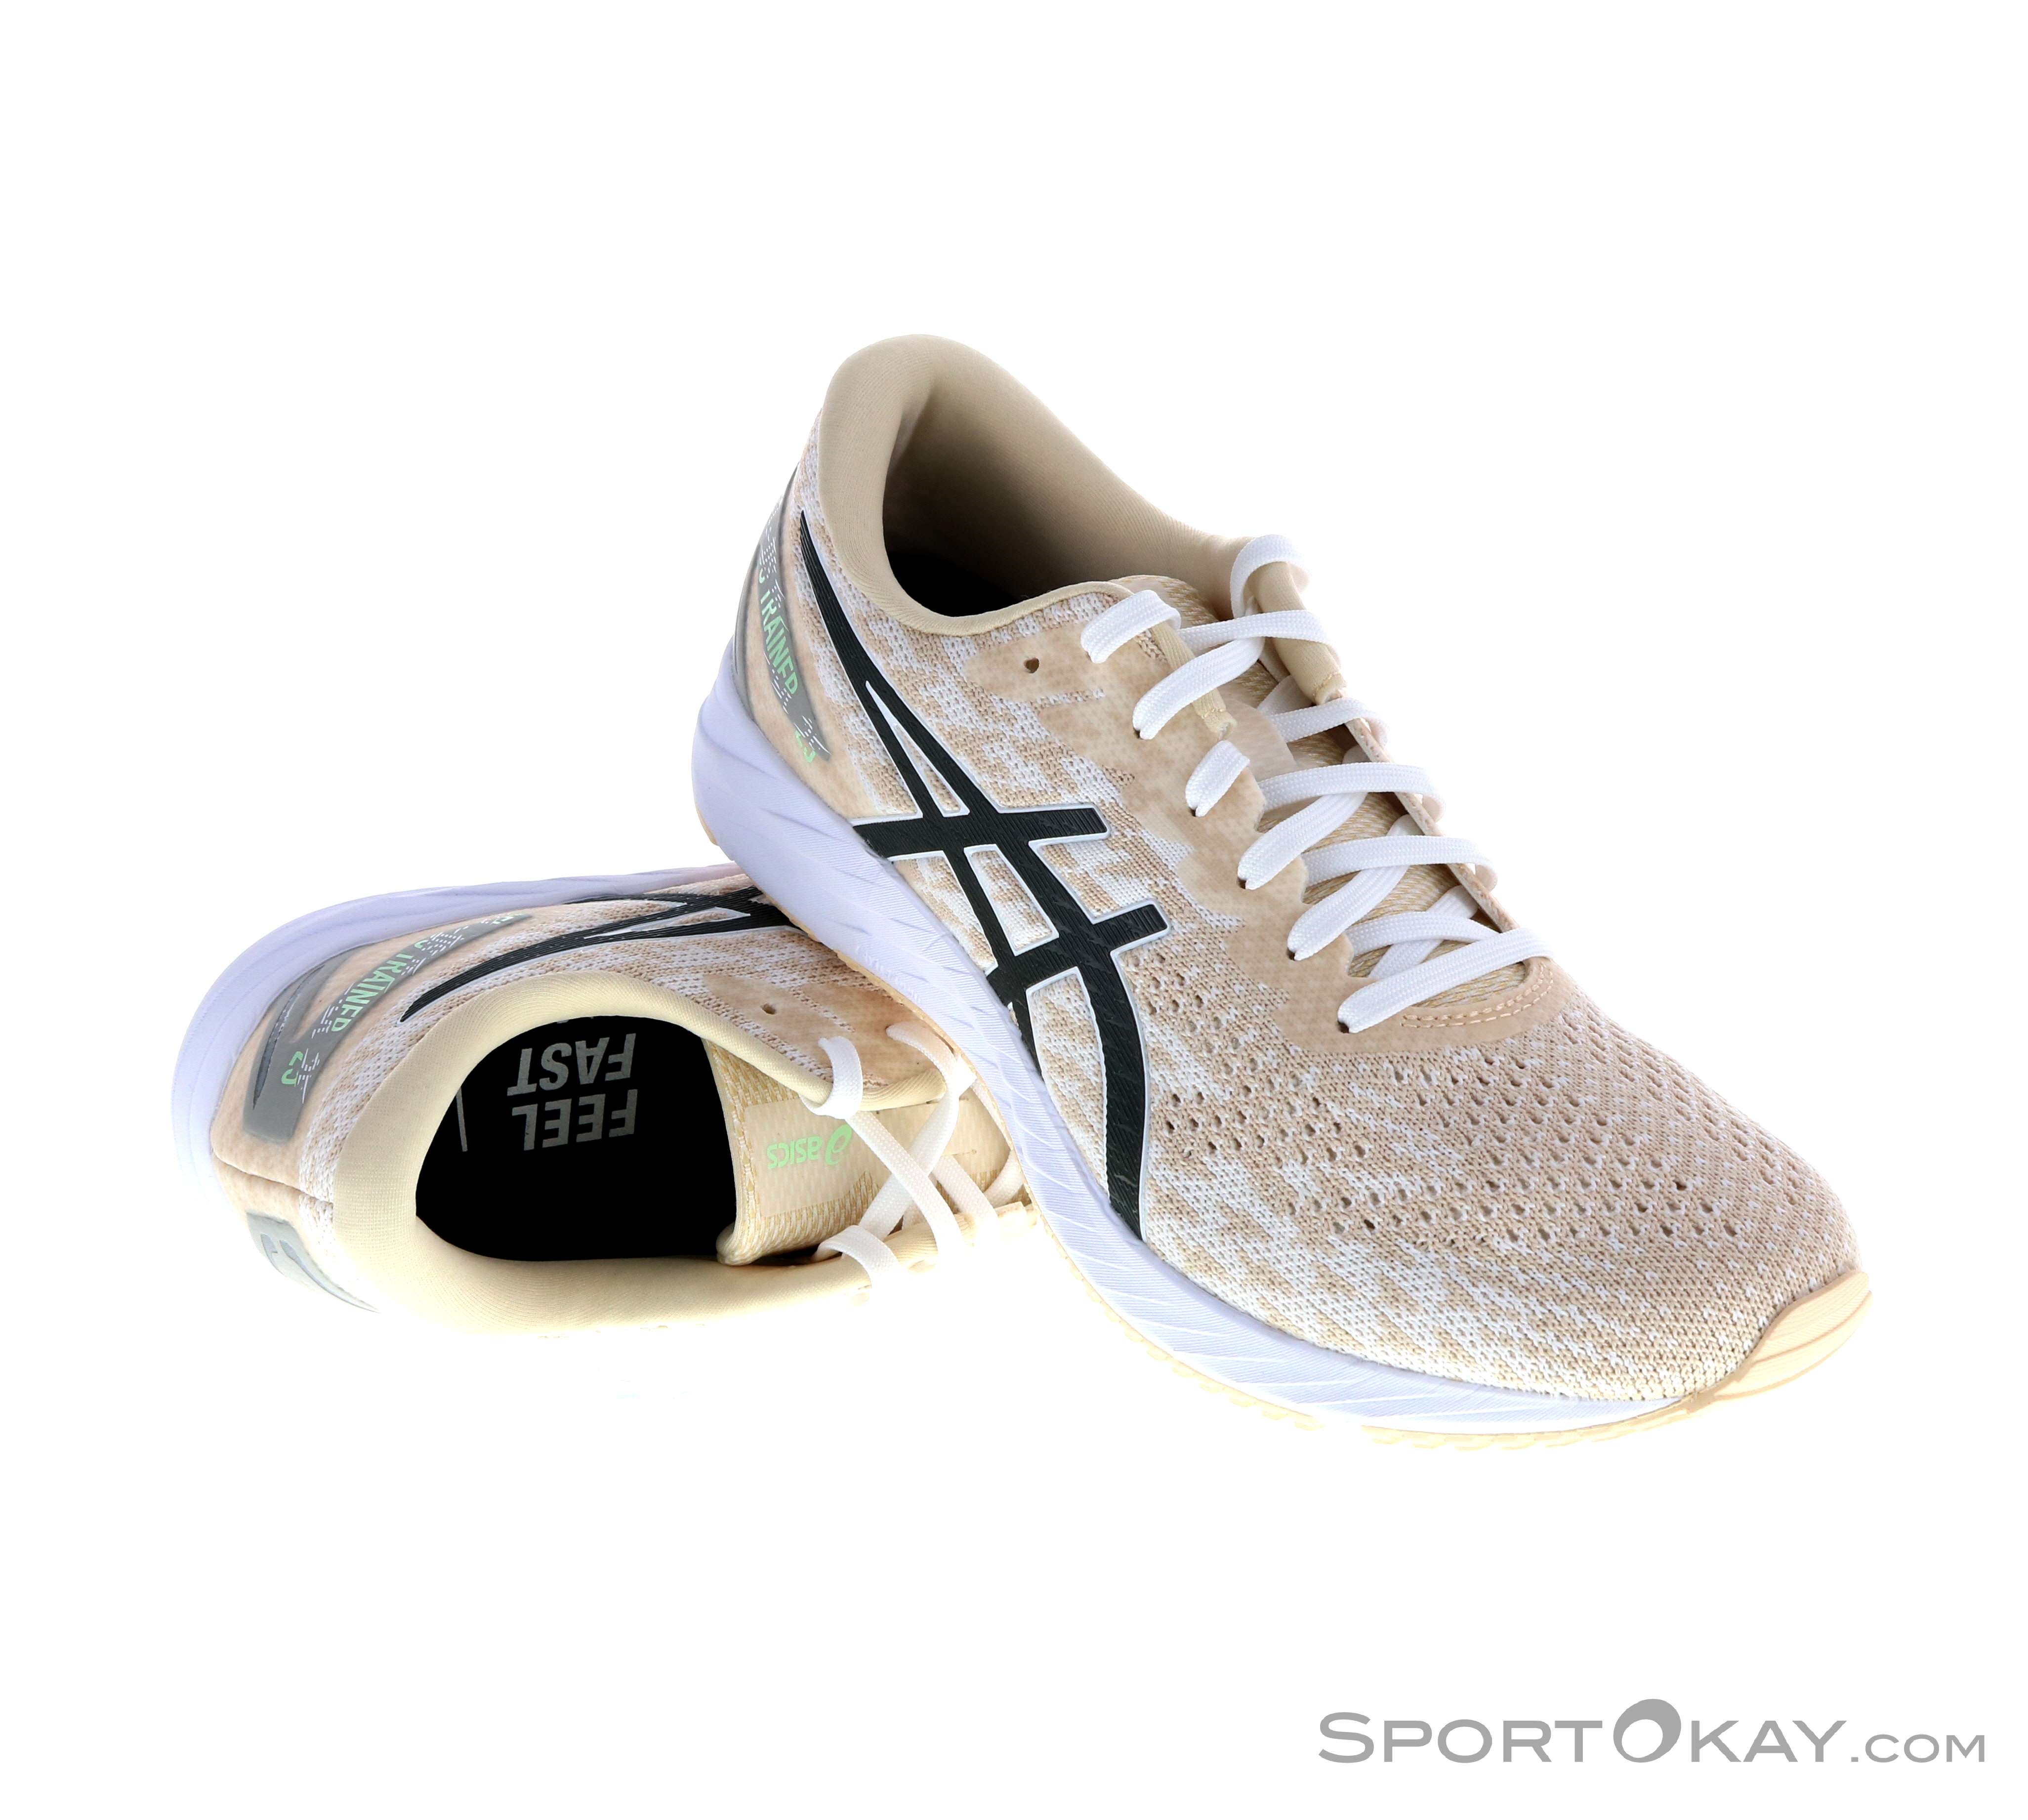 Asics Gel Ds Trainer 25 Womens Running Shoes All Round Running Shoes Running Shoes Running All